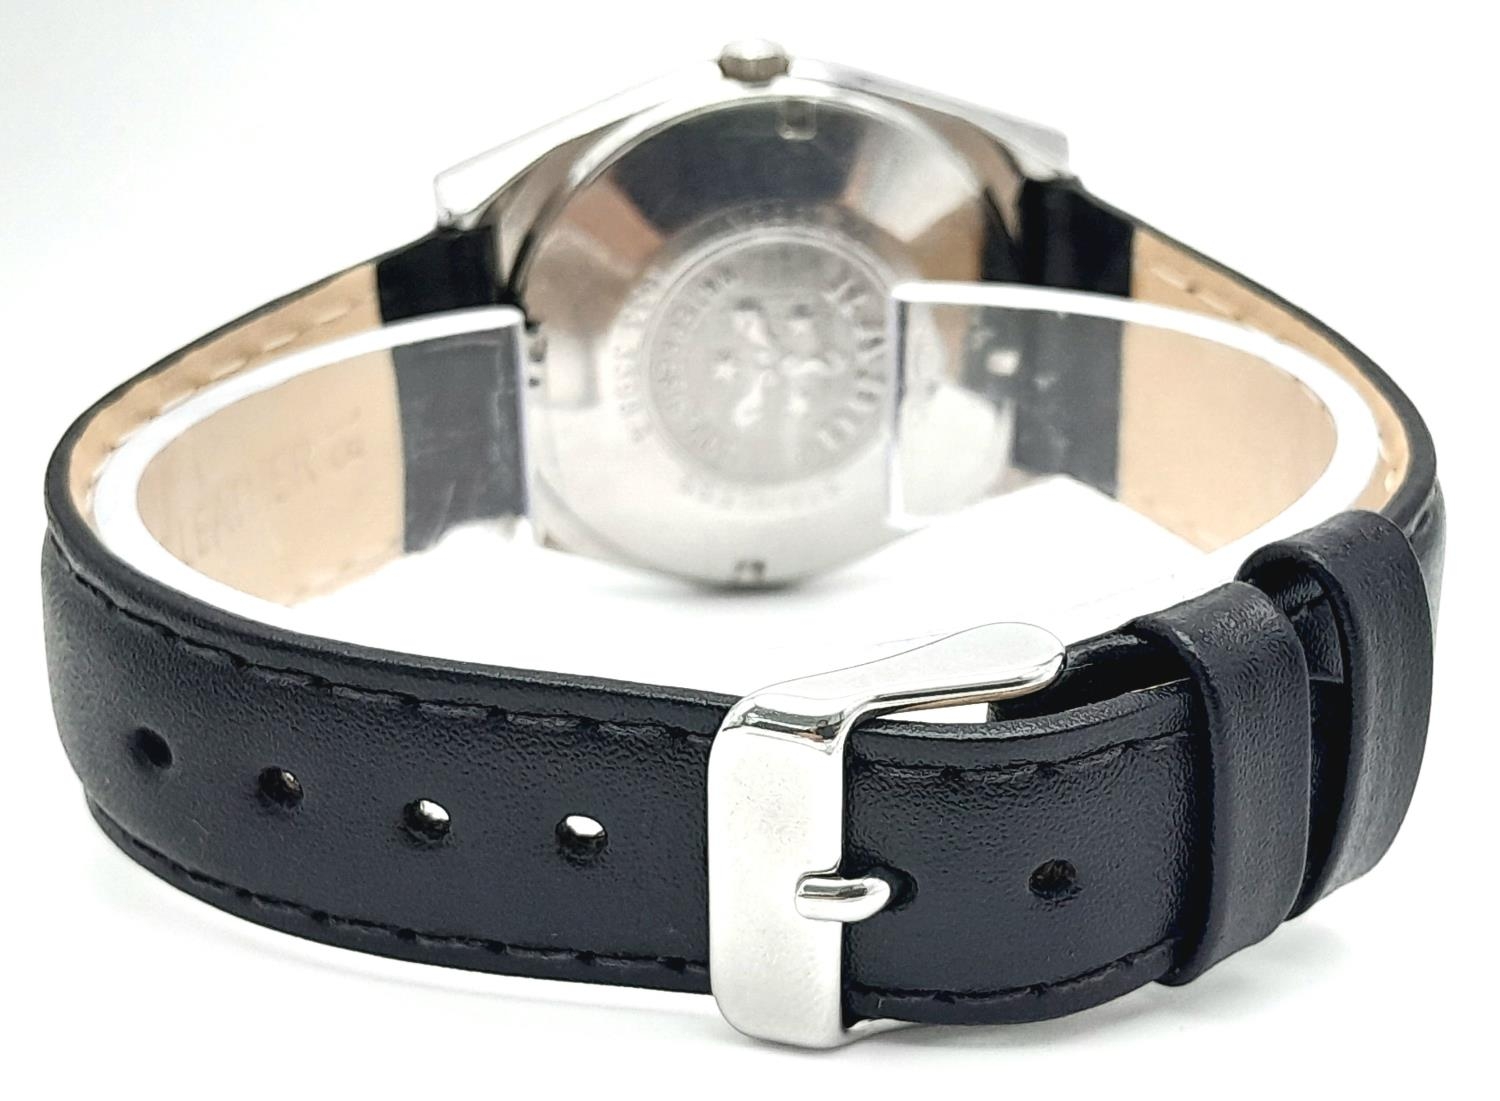 A Vintage Rado Green Horse Automatic Gents Watch. Black leather strap. Stainless steel case - - Image 4 of 6